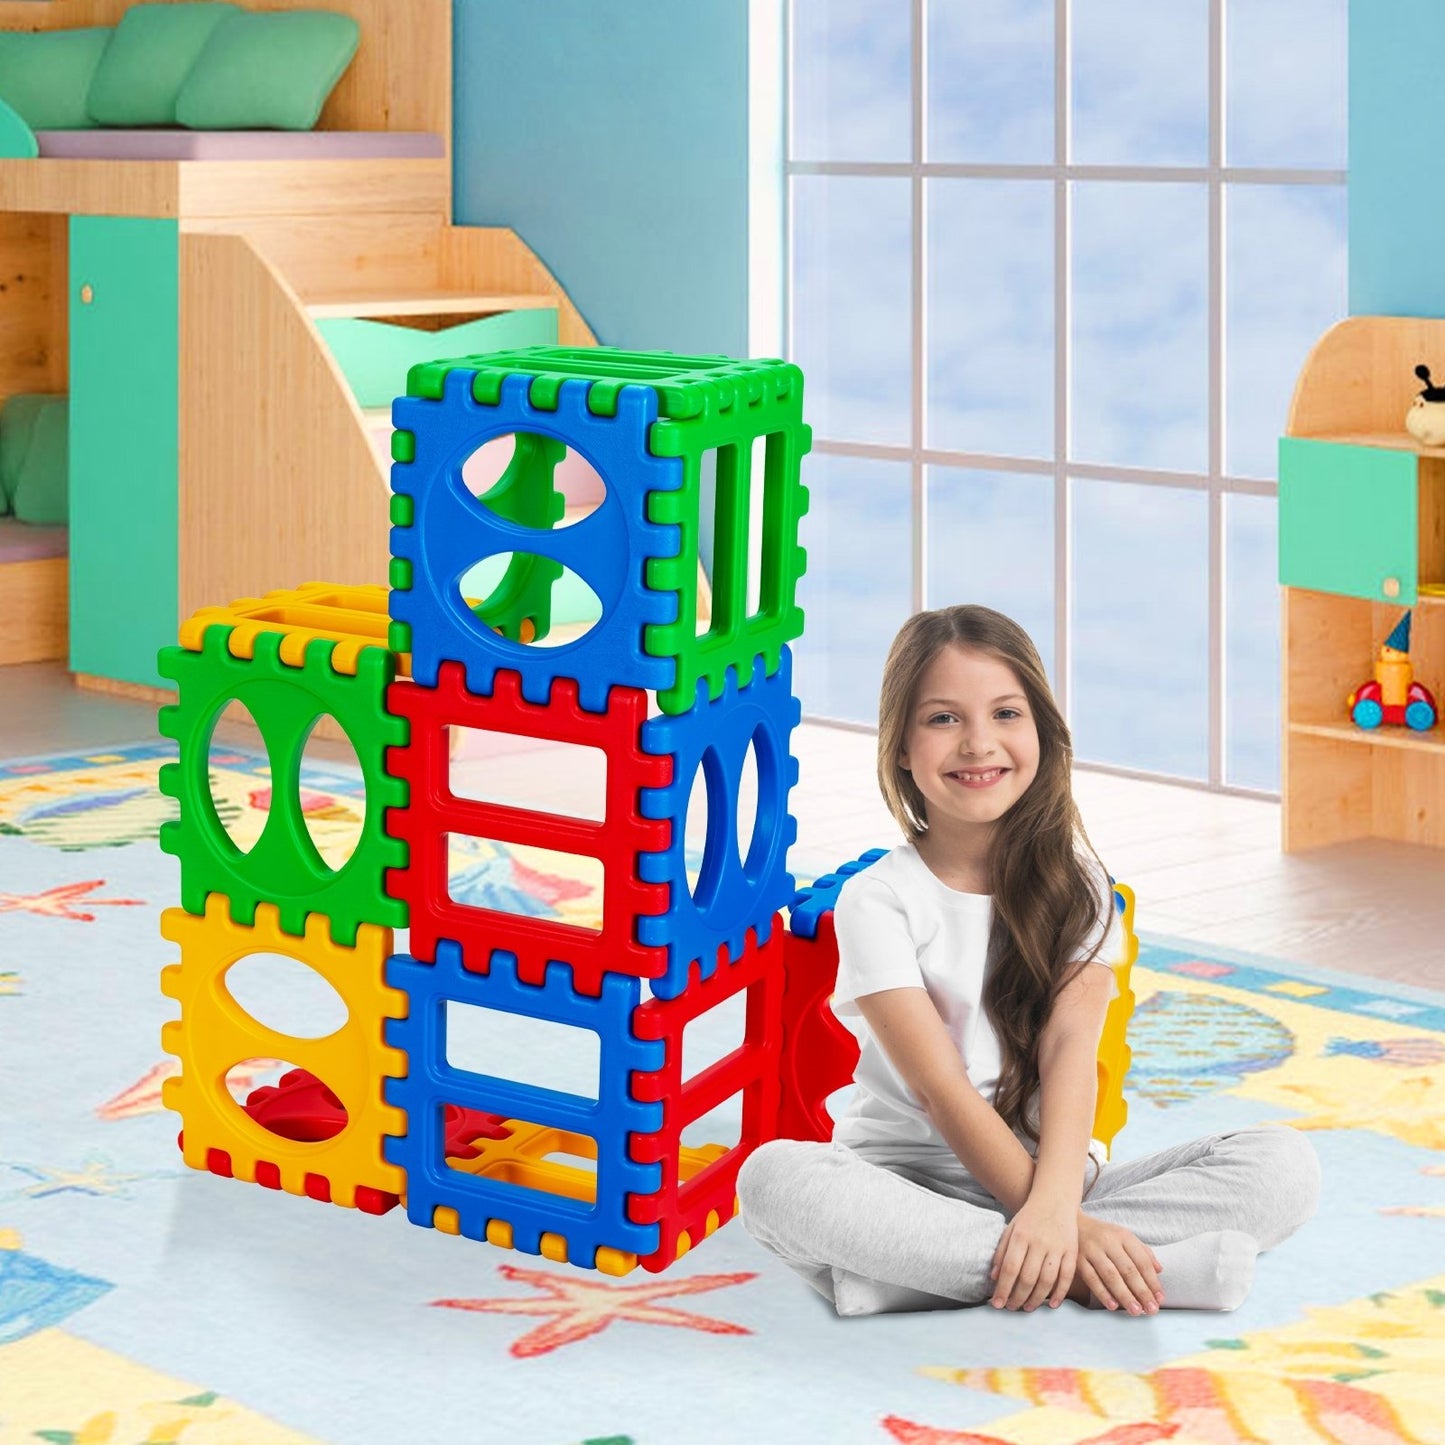 32 Pieces Big Waffle Block Set Kids Educational Stacking Building Toy, Multicolor